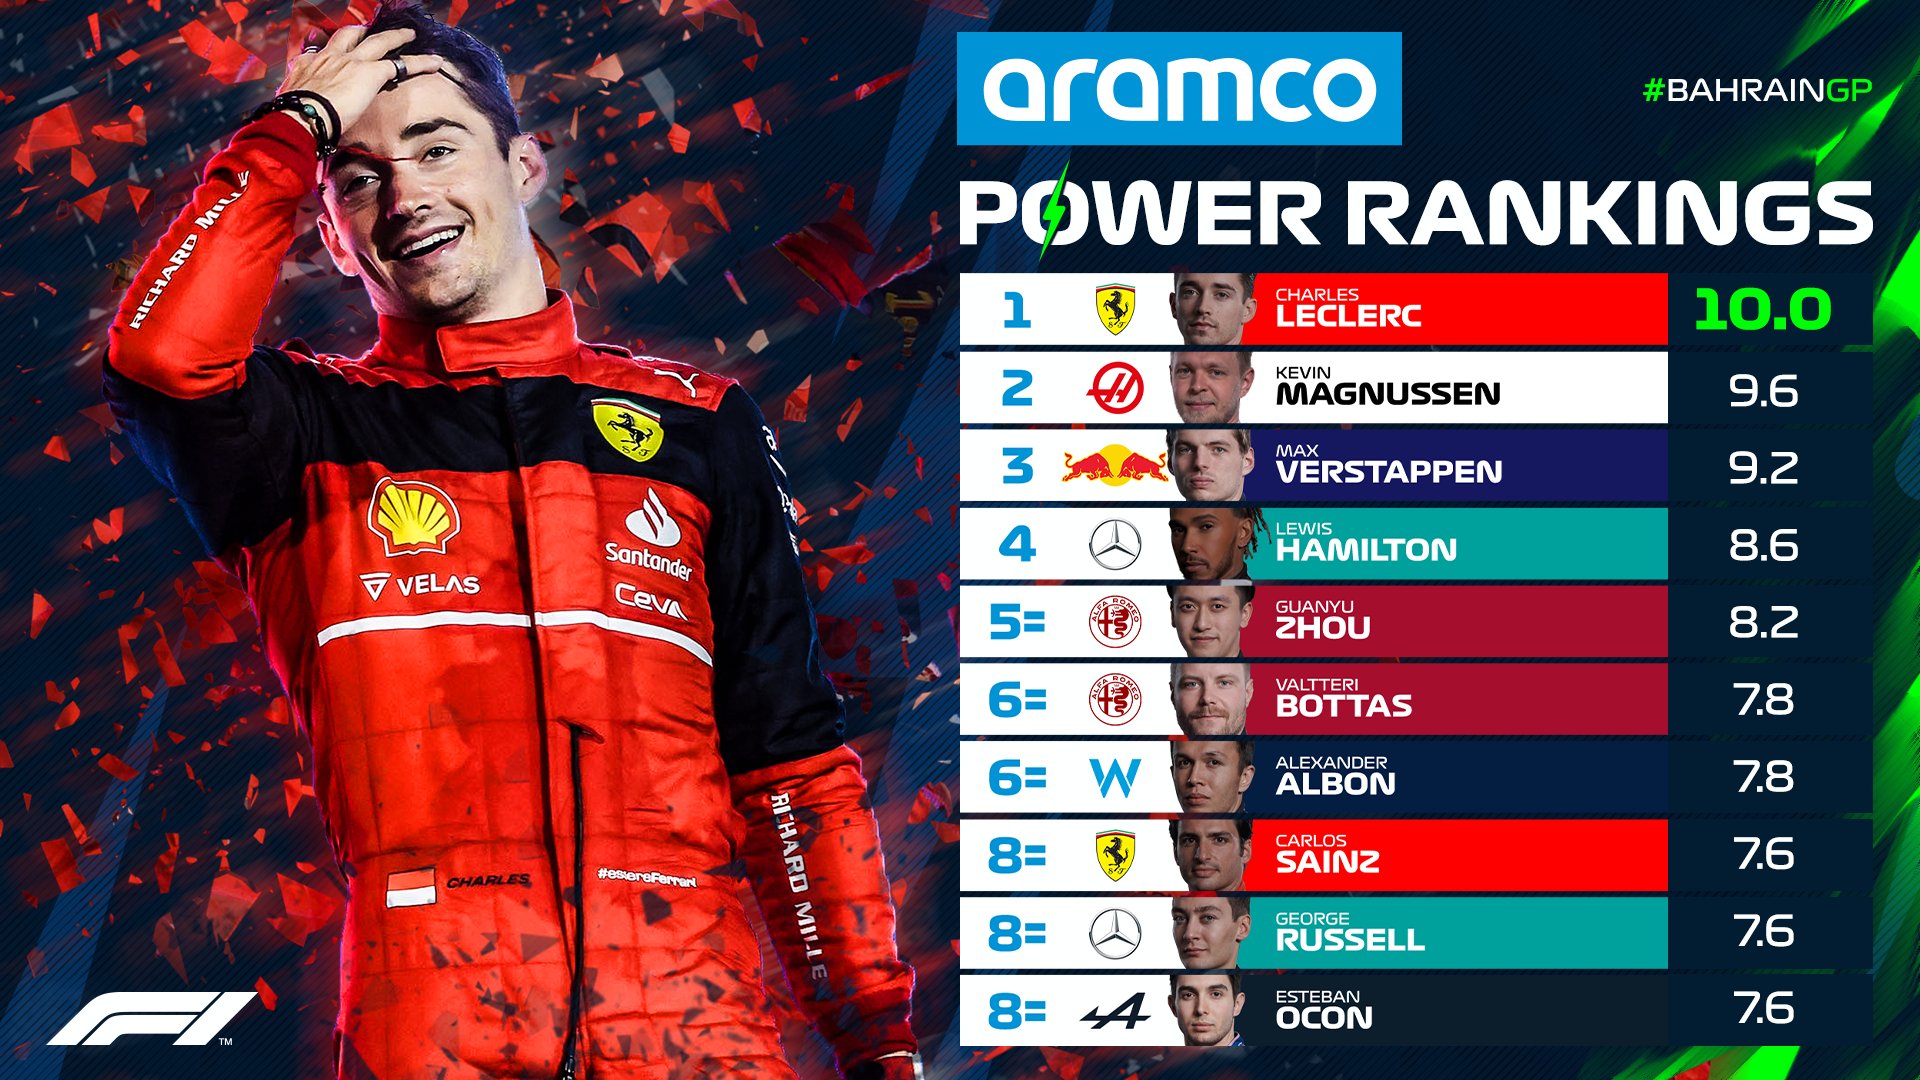 Haas F1 Team on Twitter "RT F1 First ⚡️ POWER RANKINGS ⚡️ of 2022! 